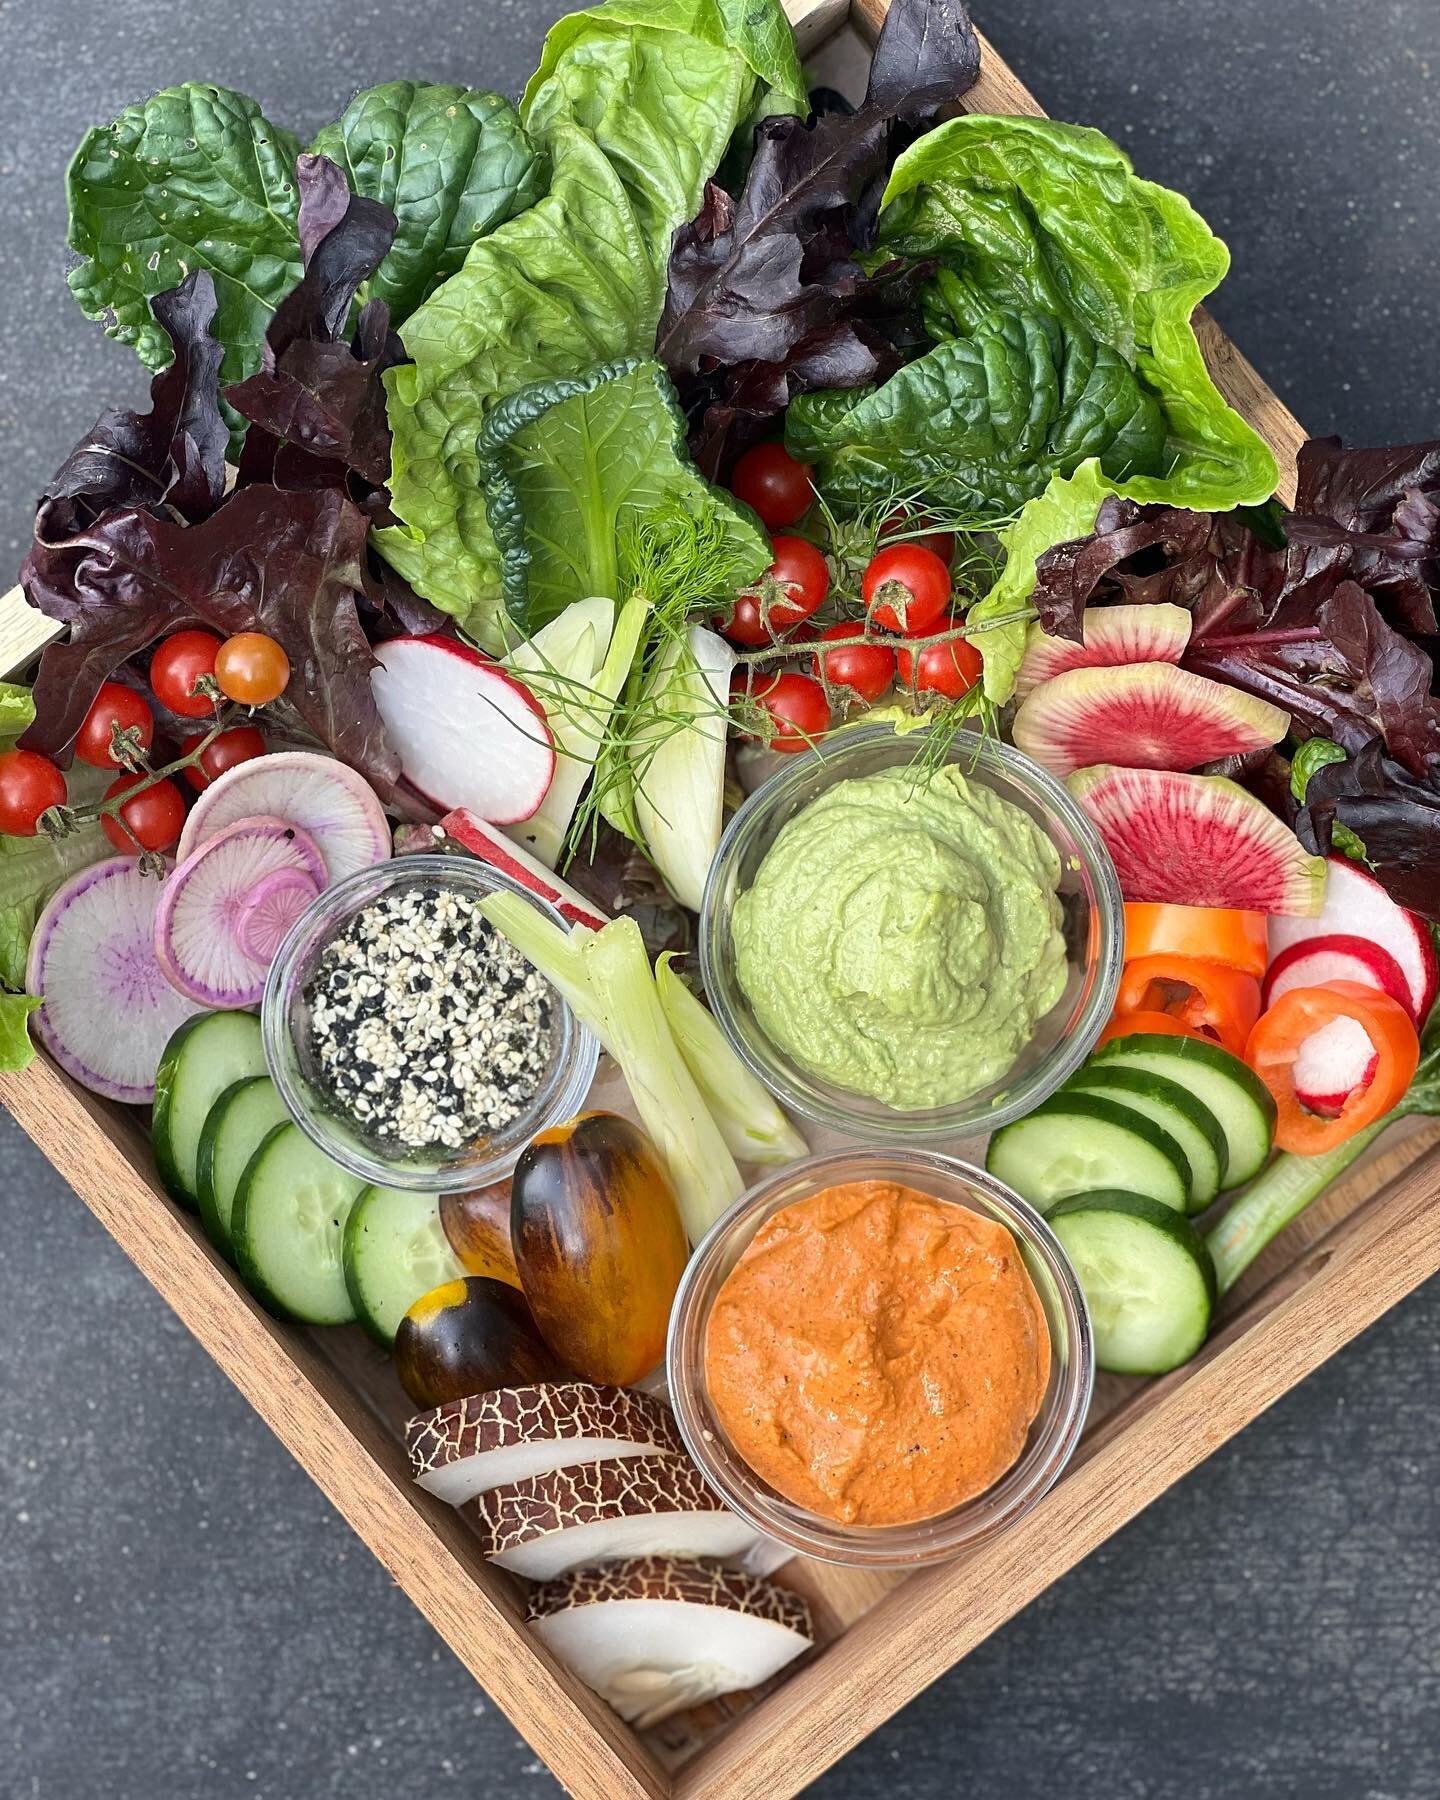 Come in and reap the celebration of a successful harvest&mdash; a farm grazing box of a variety of organic vegetables and greens I've lovingly handpicked at @stonybrookcanyonfarm . All served with spreads and dips hand made with care from all our awe